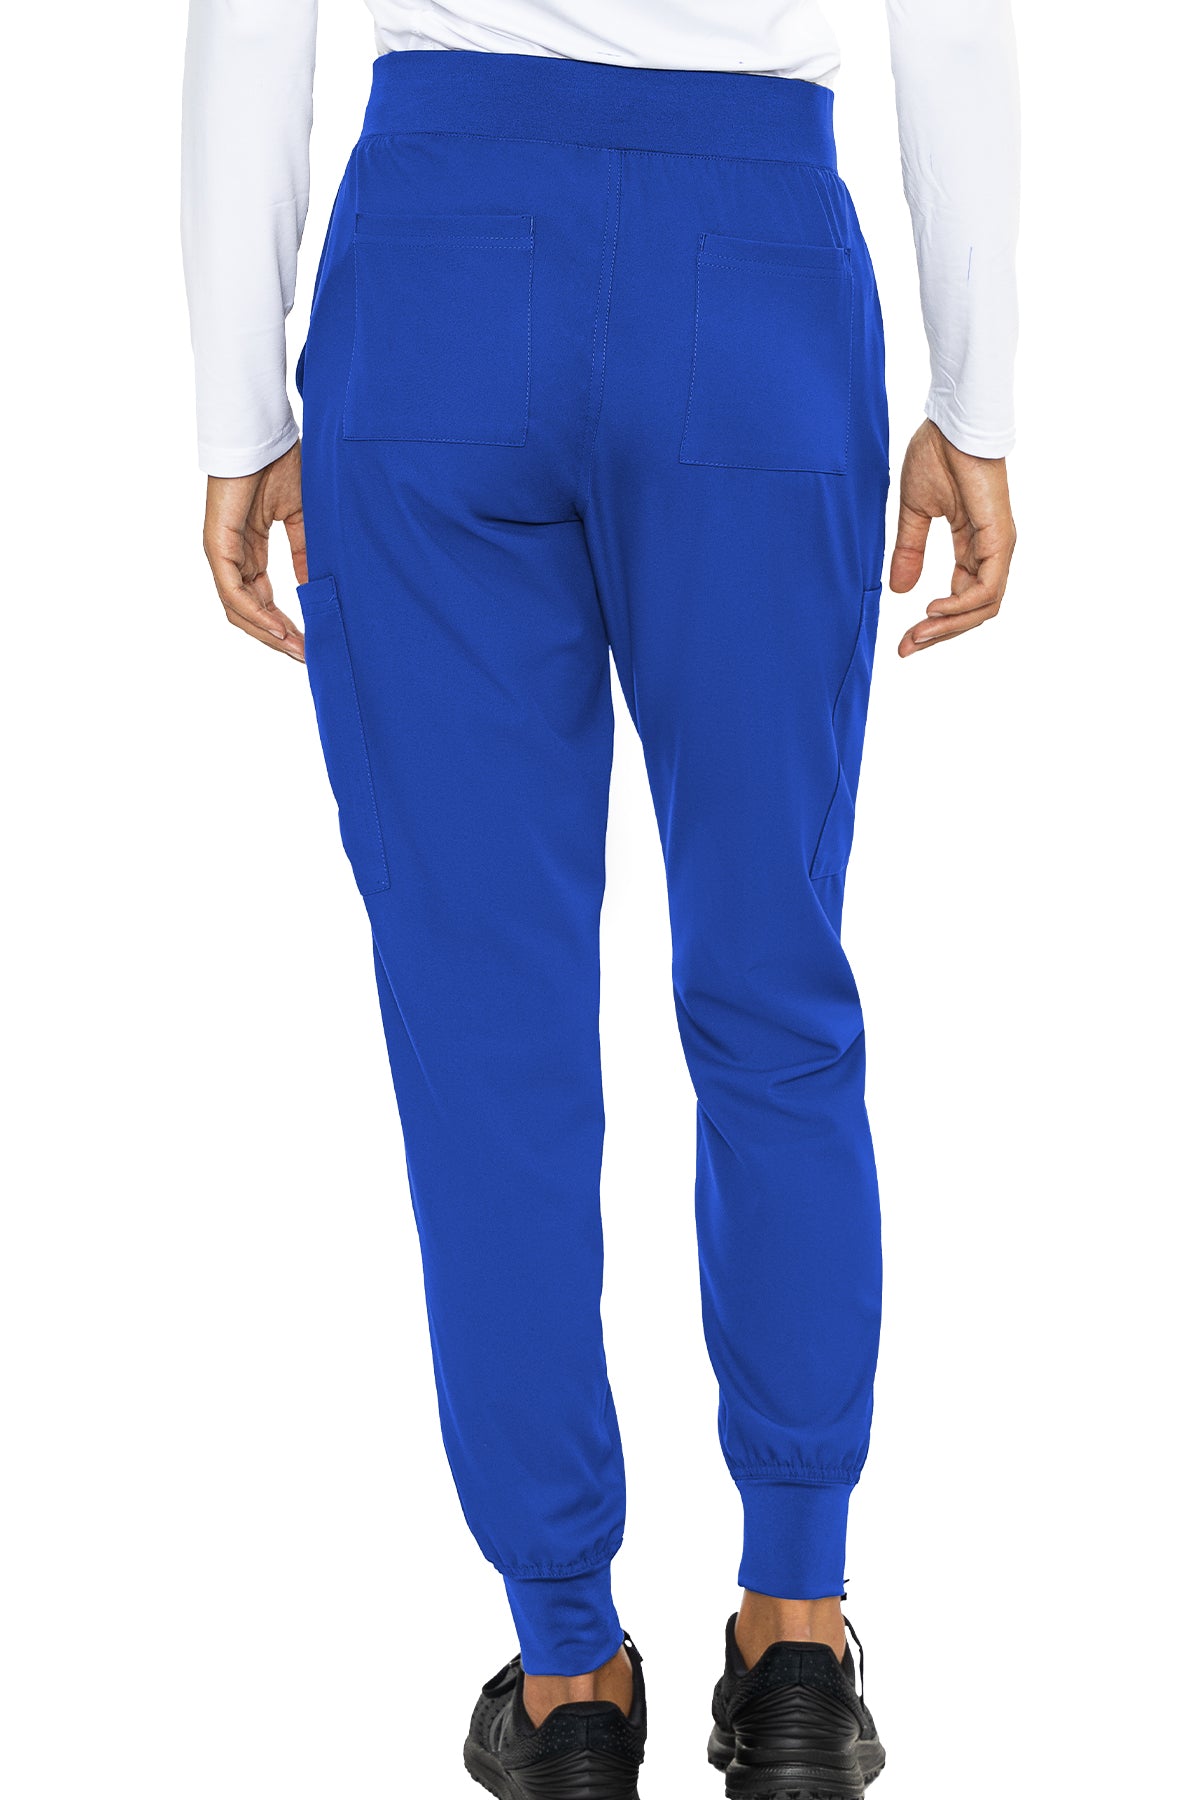 Med Couture 2711 Insight Jogger Pant Royal Back